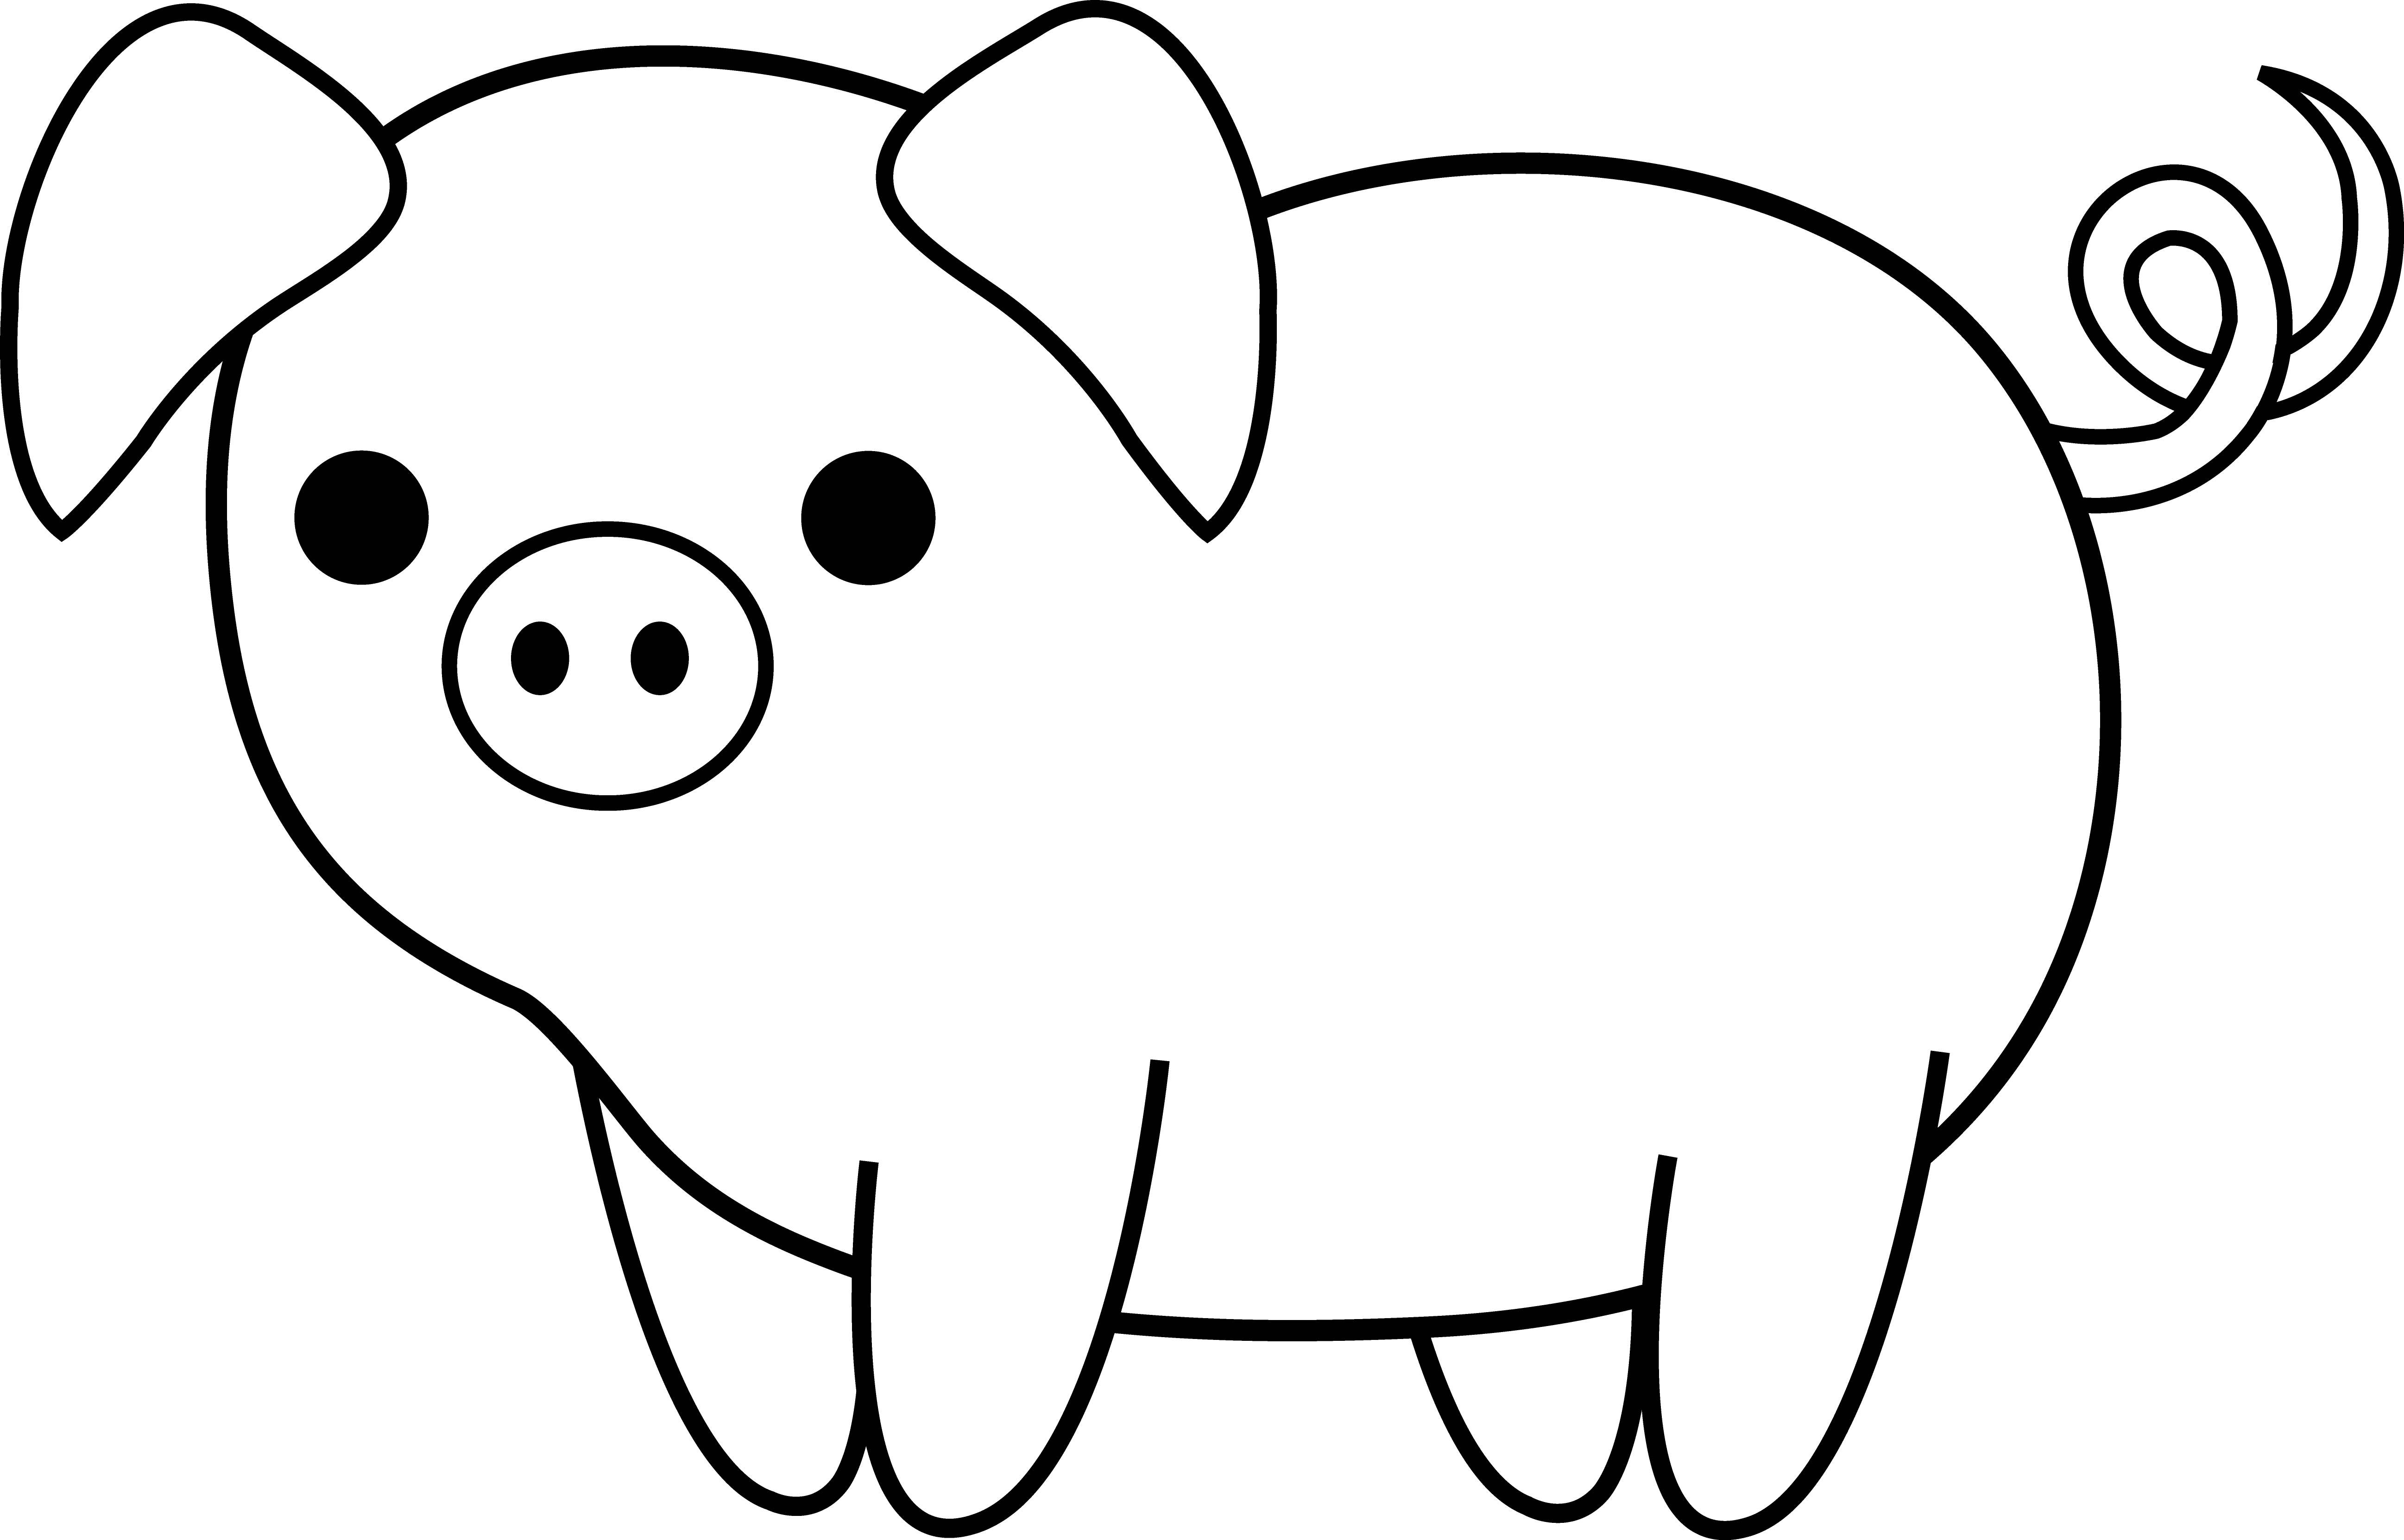 Cute Black and White Pig